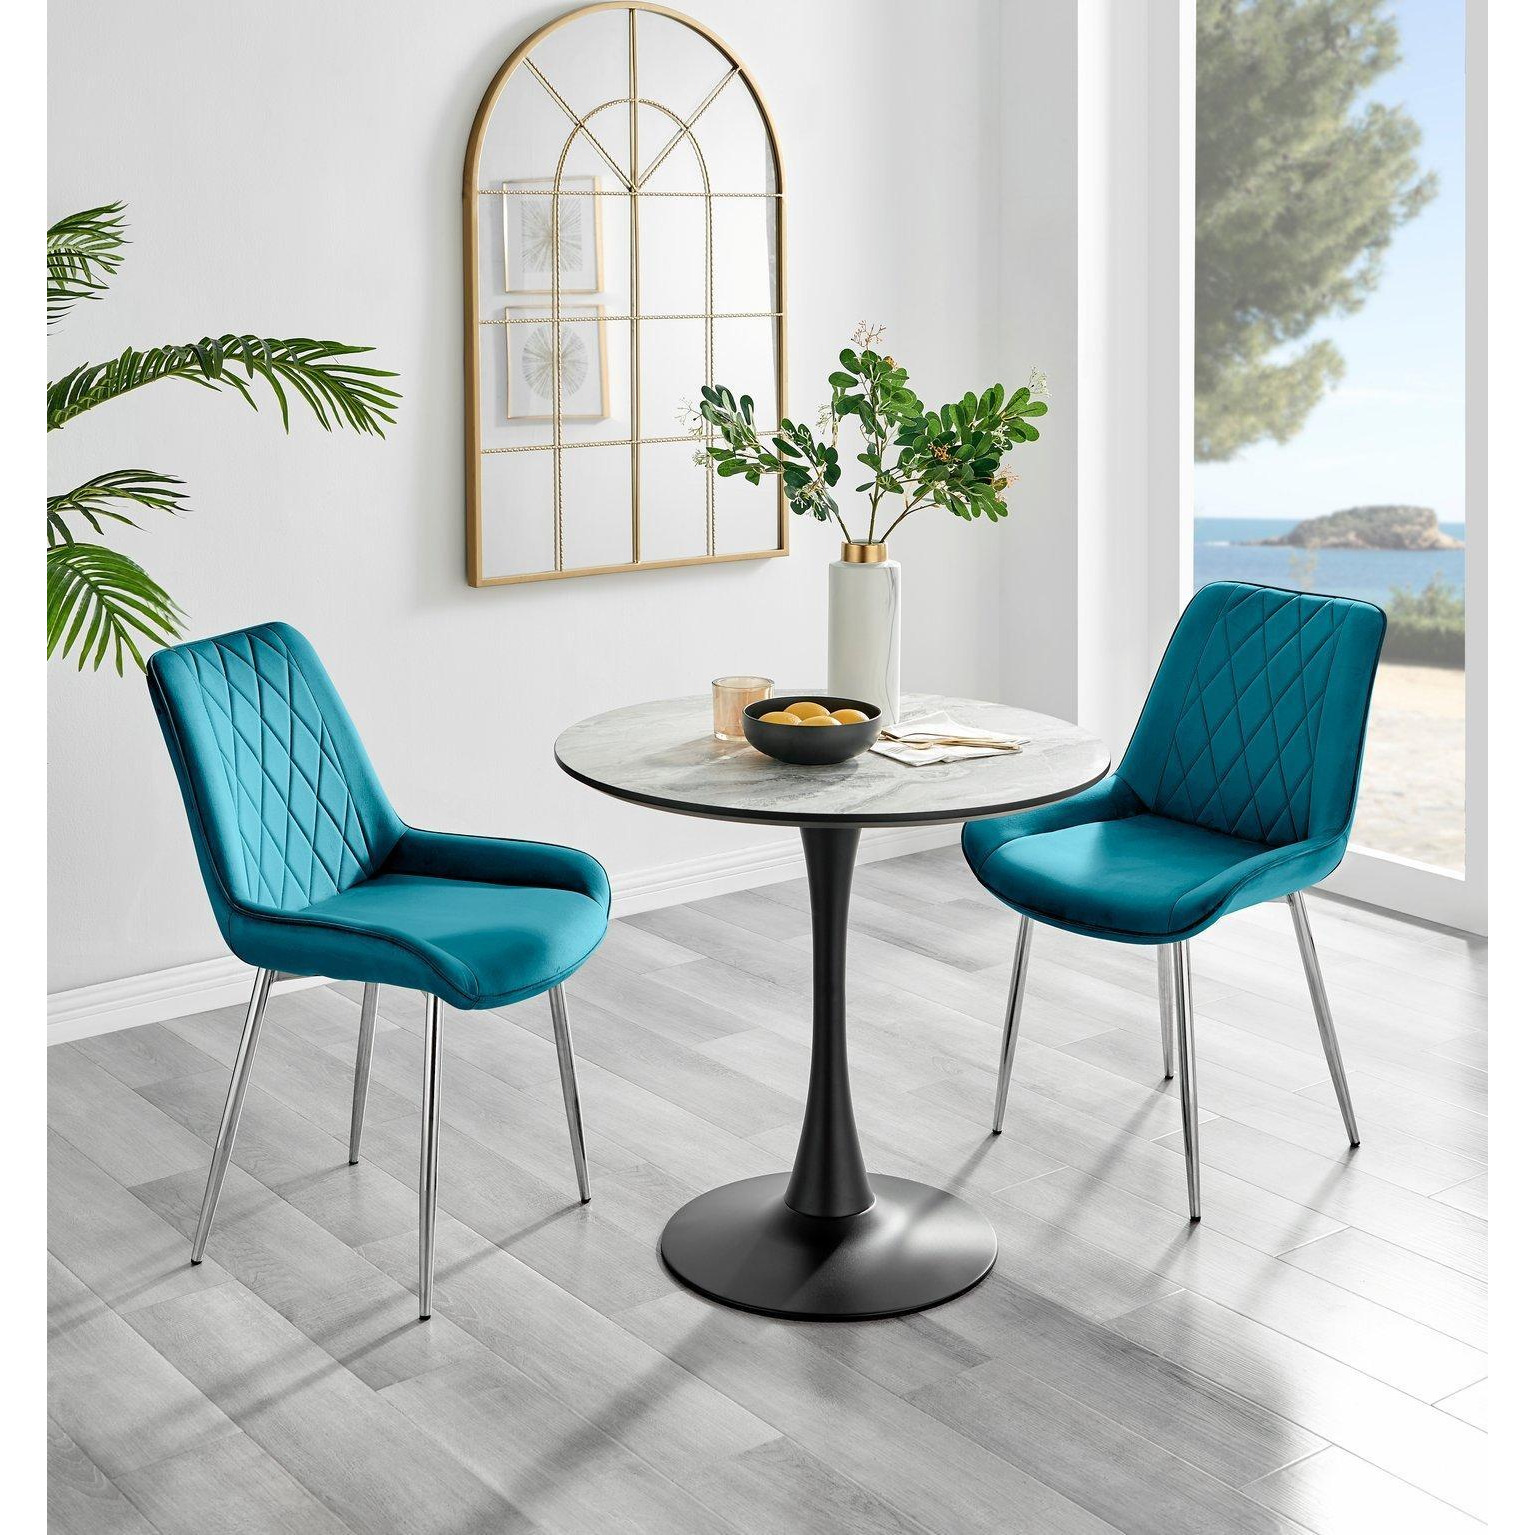 Elina White Marble Effect Scratch Resistant Dining Table & 2 Pesaro Silver Leg Velvet Chairs - image 1